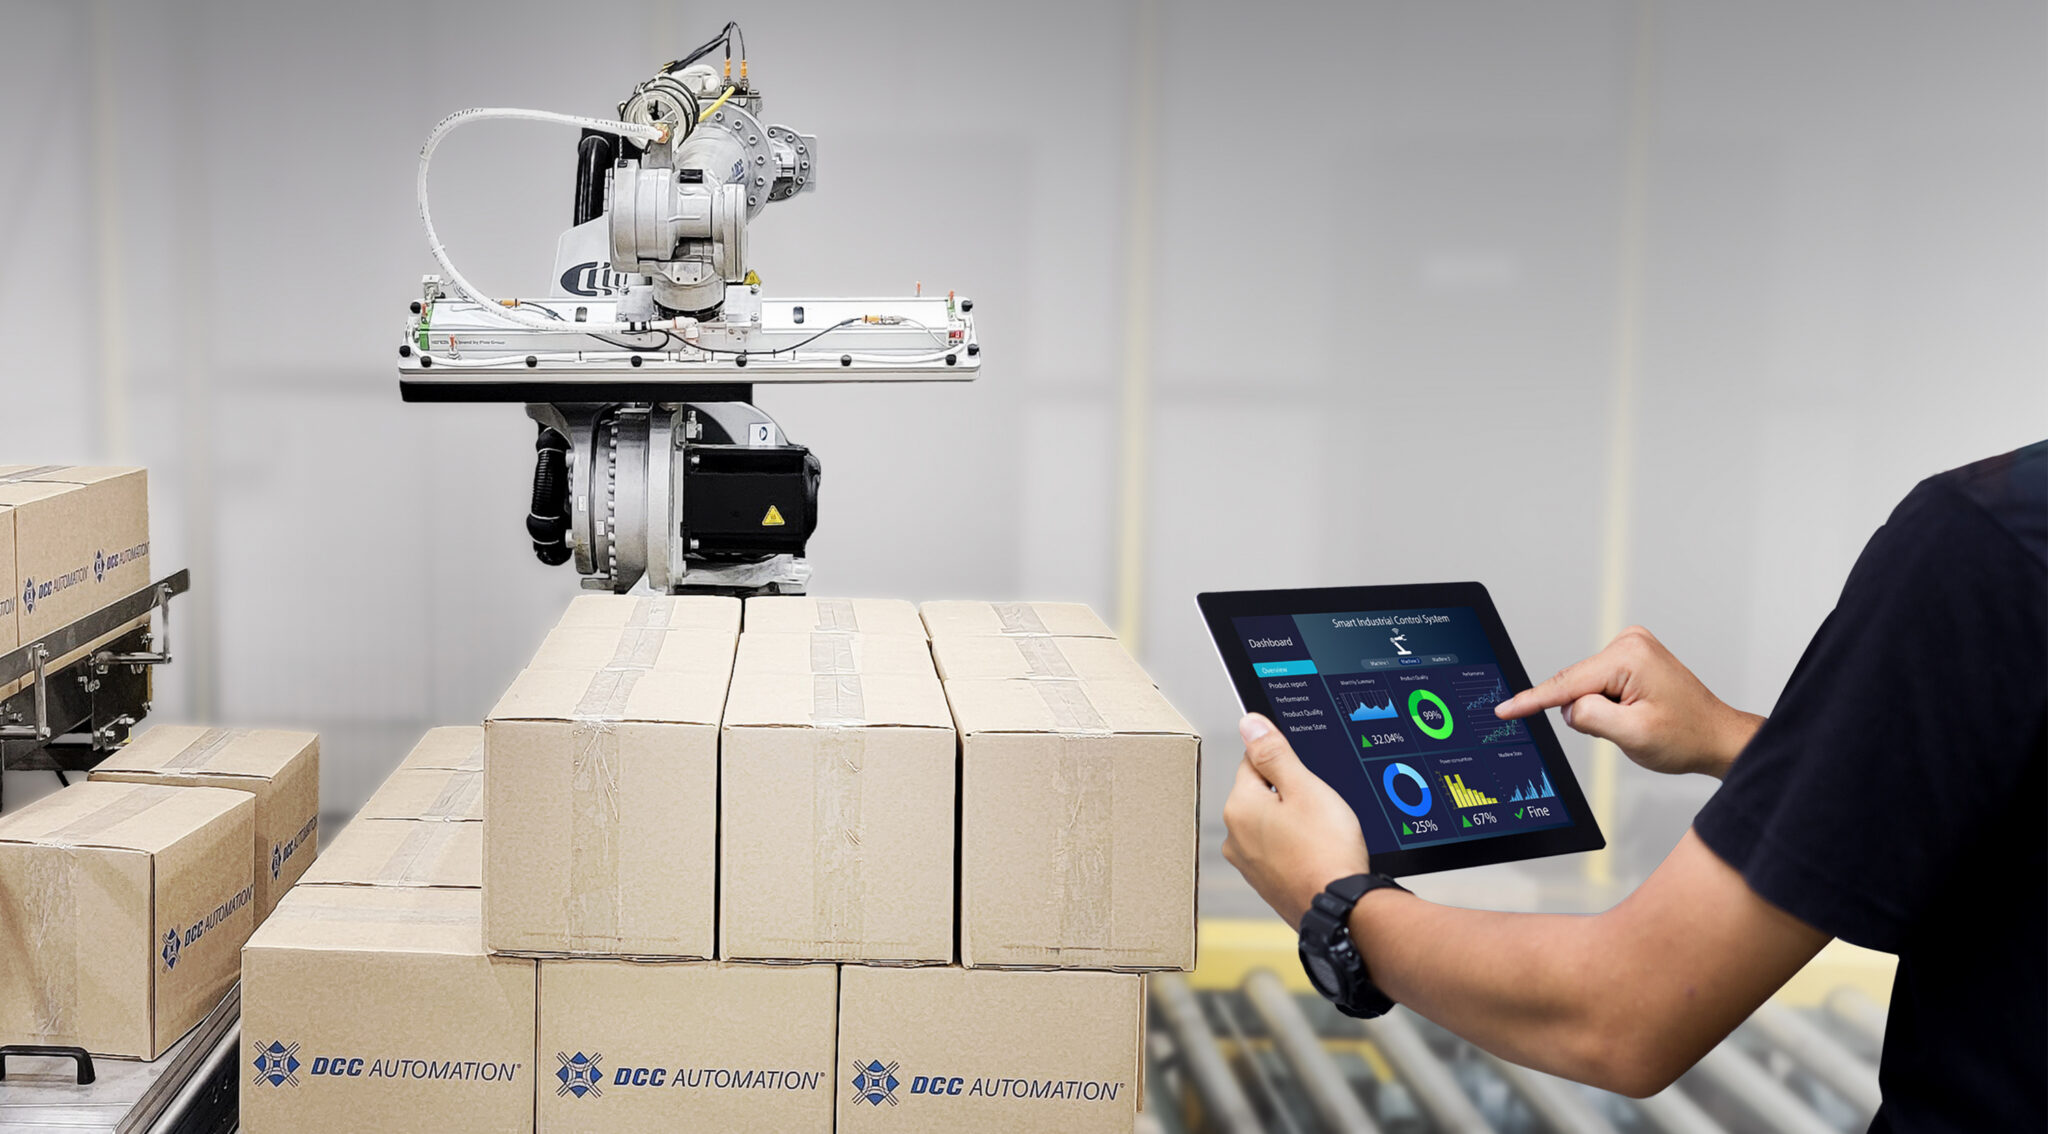 Comau, Rockwell Automation present unified robot control solutions at